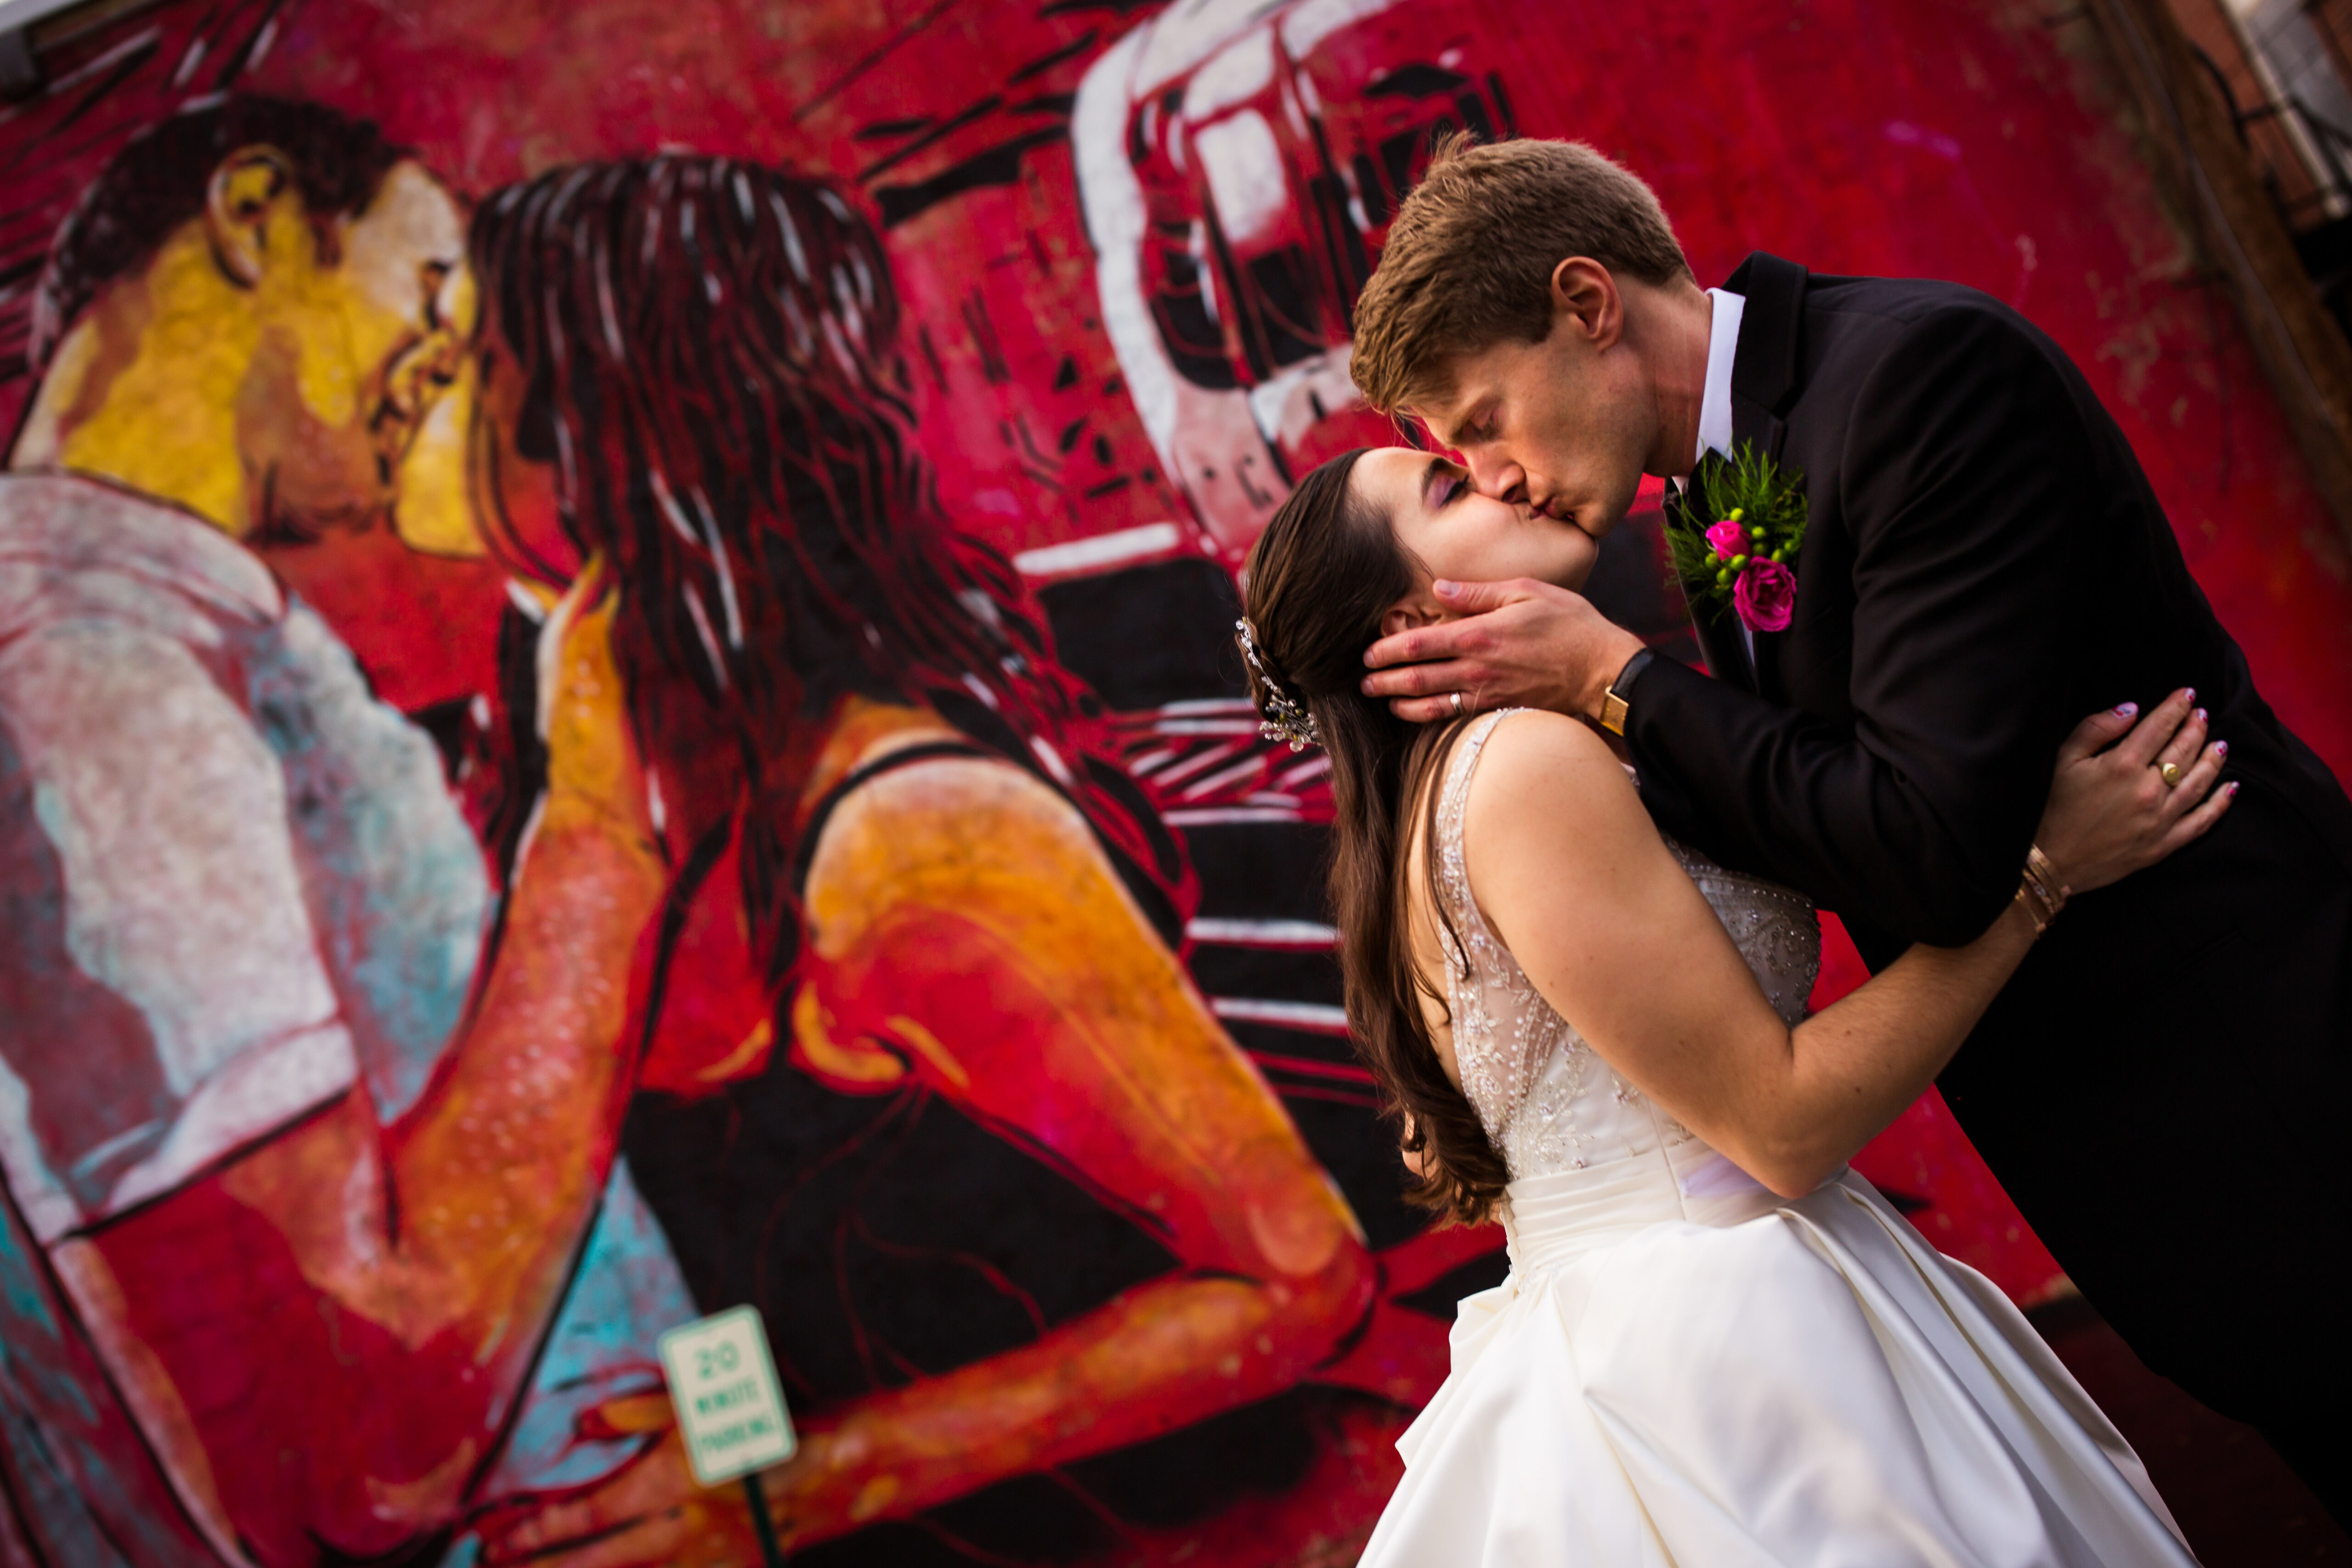 Creative York Wedding Photographer, Lisa Rhinehart, captures this unique, fun, creative image of the couple kissing one another as a couple kissing is painted on the wall behind them in this vibrant colorful mural